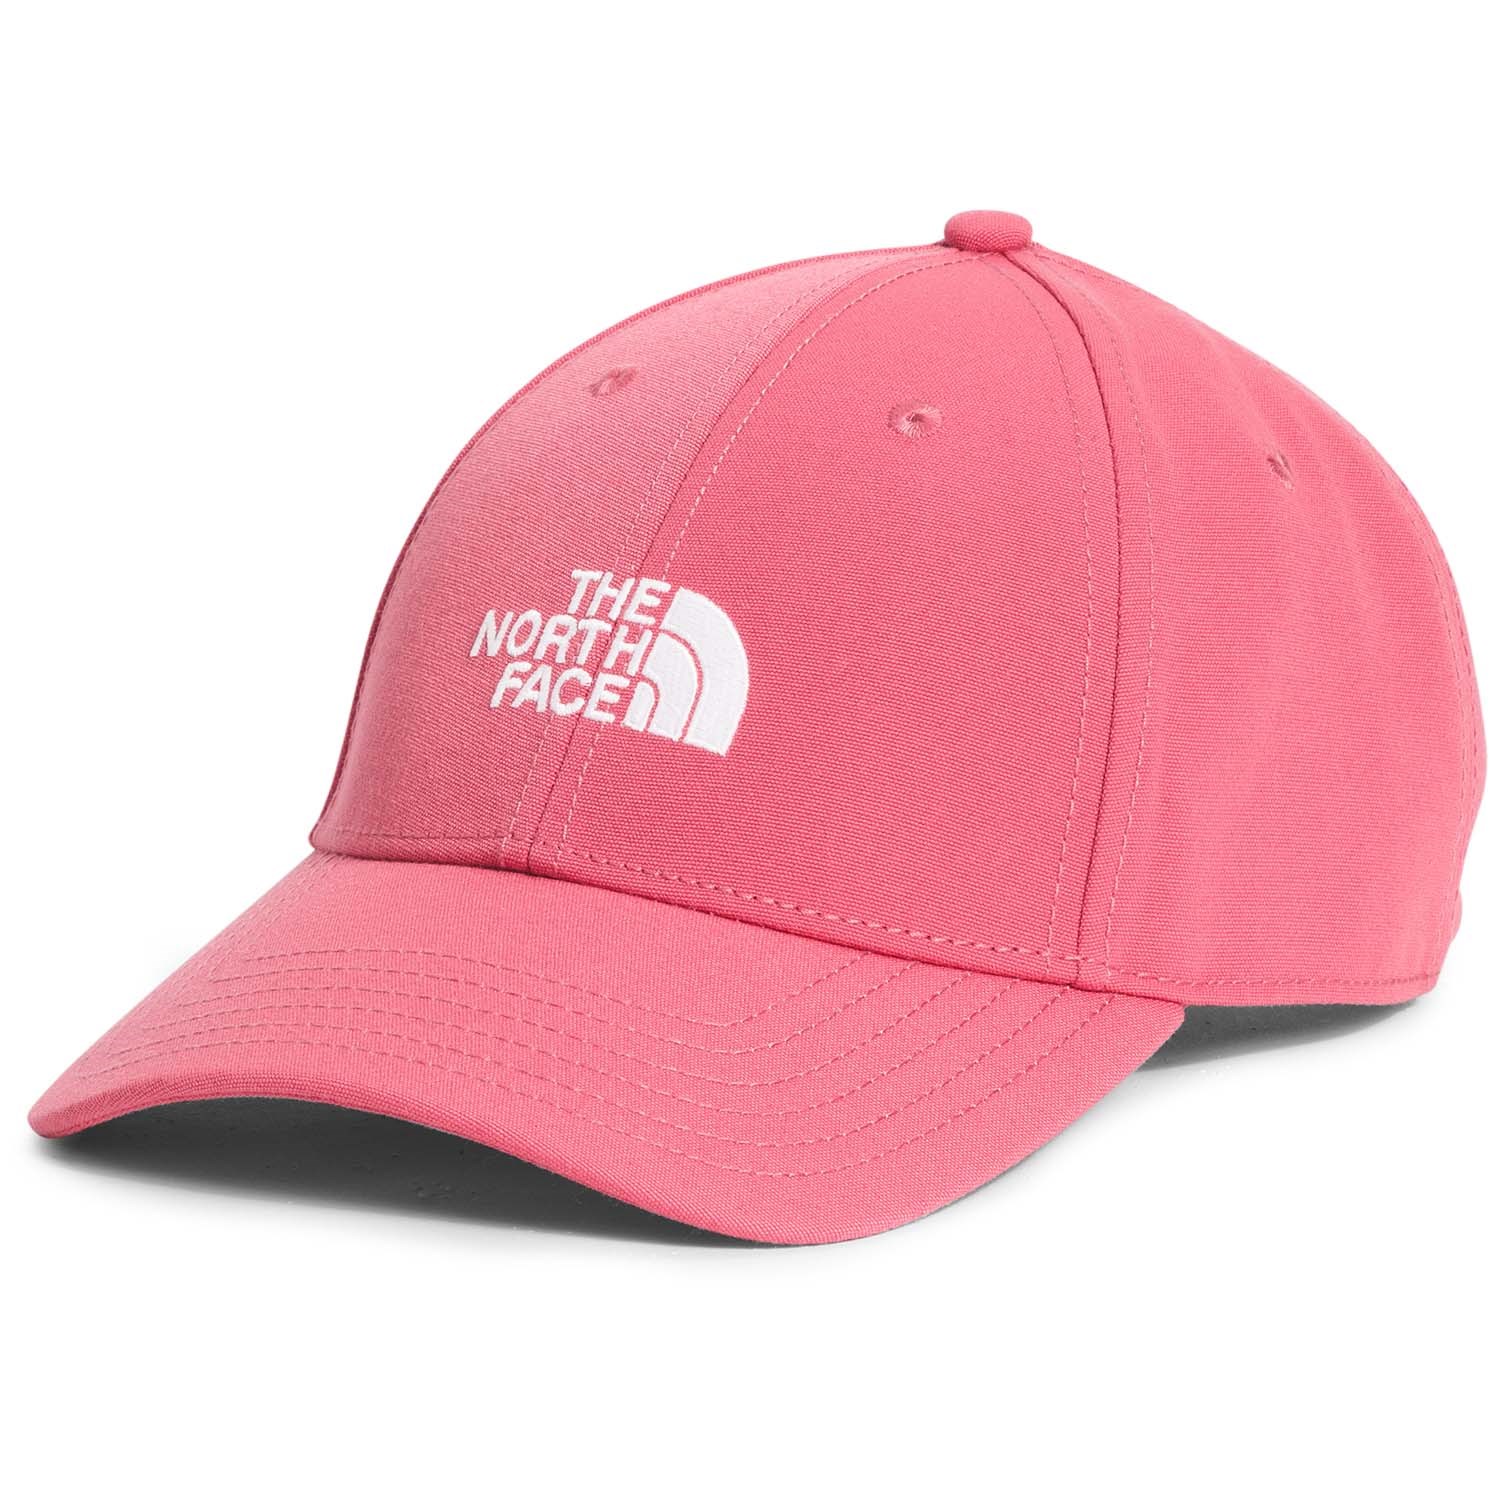 Кепка The North Face Recycled 66 Classic, цвет Cosmo Pink